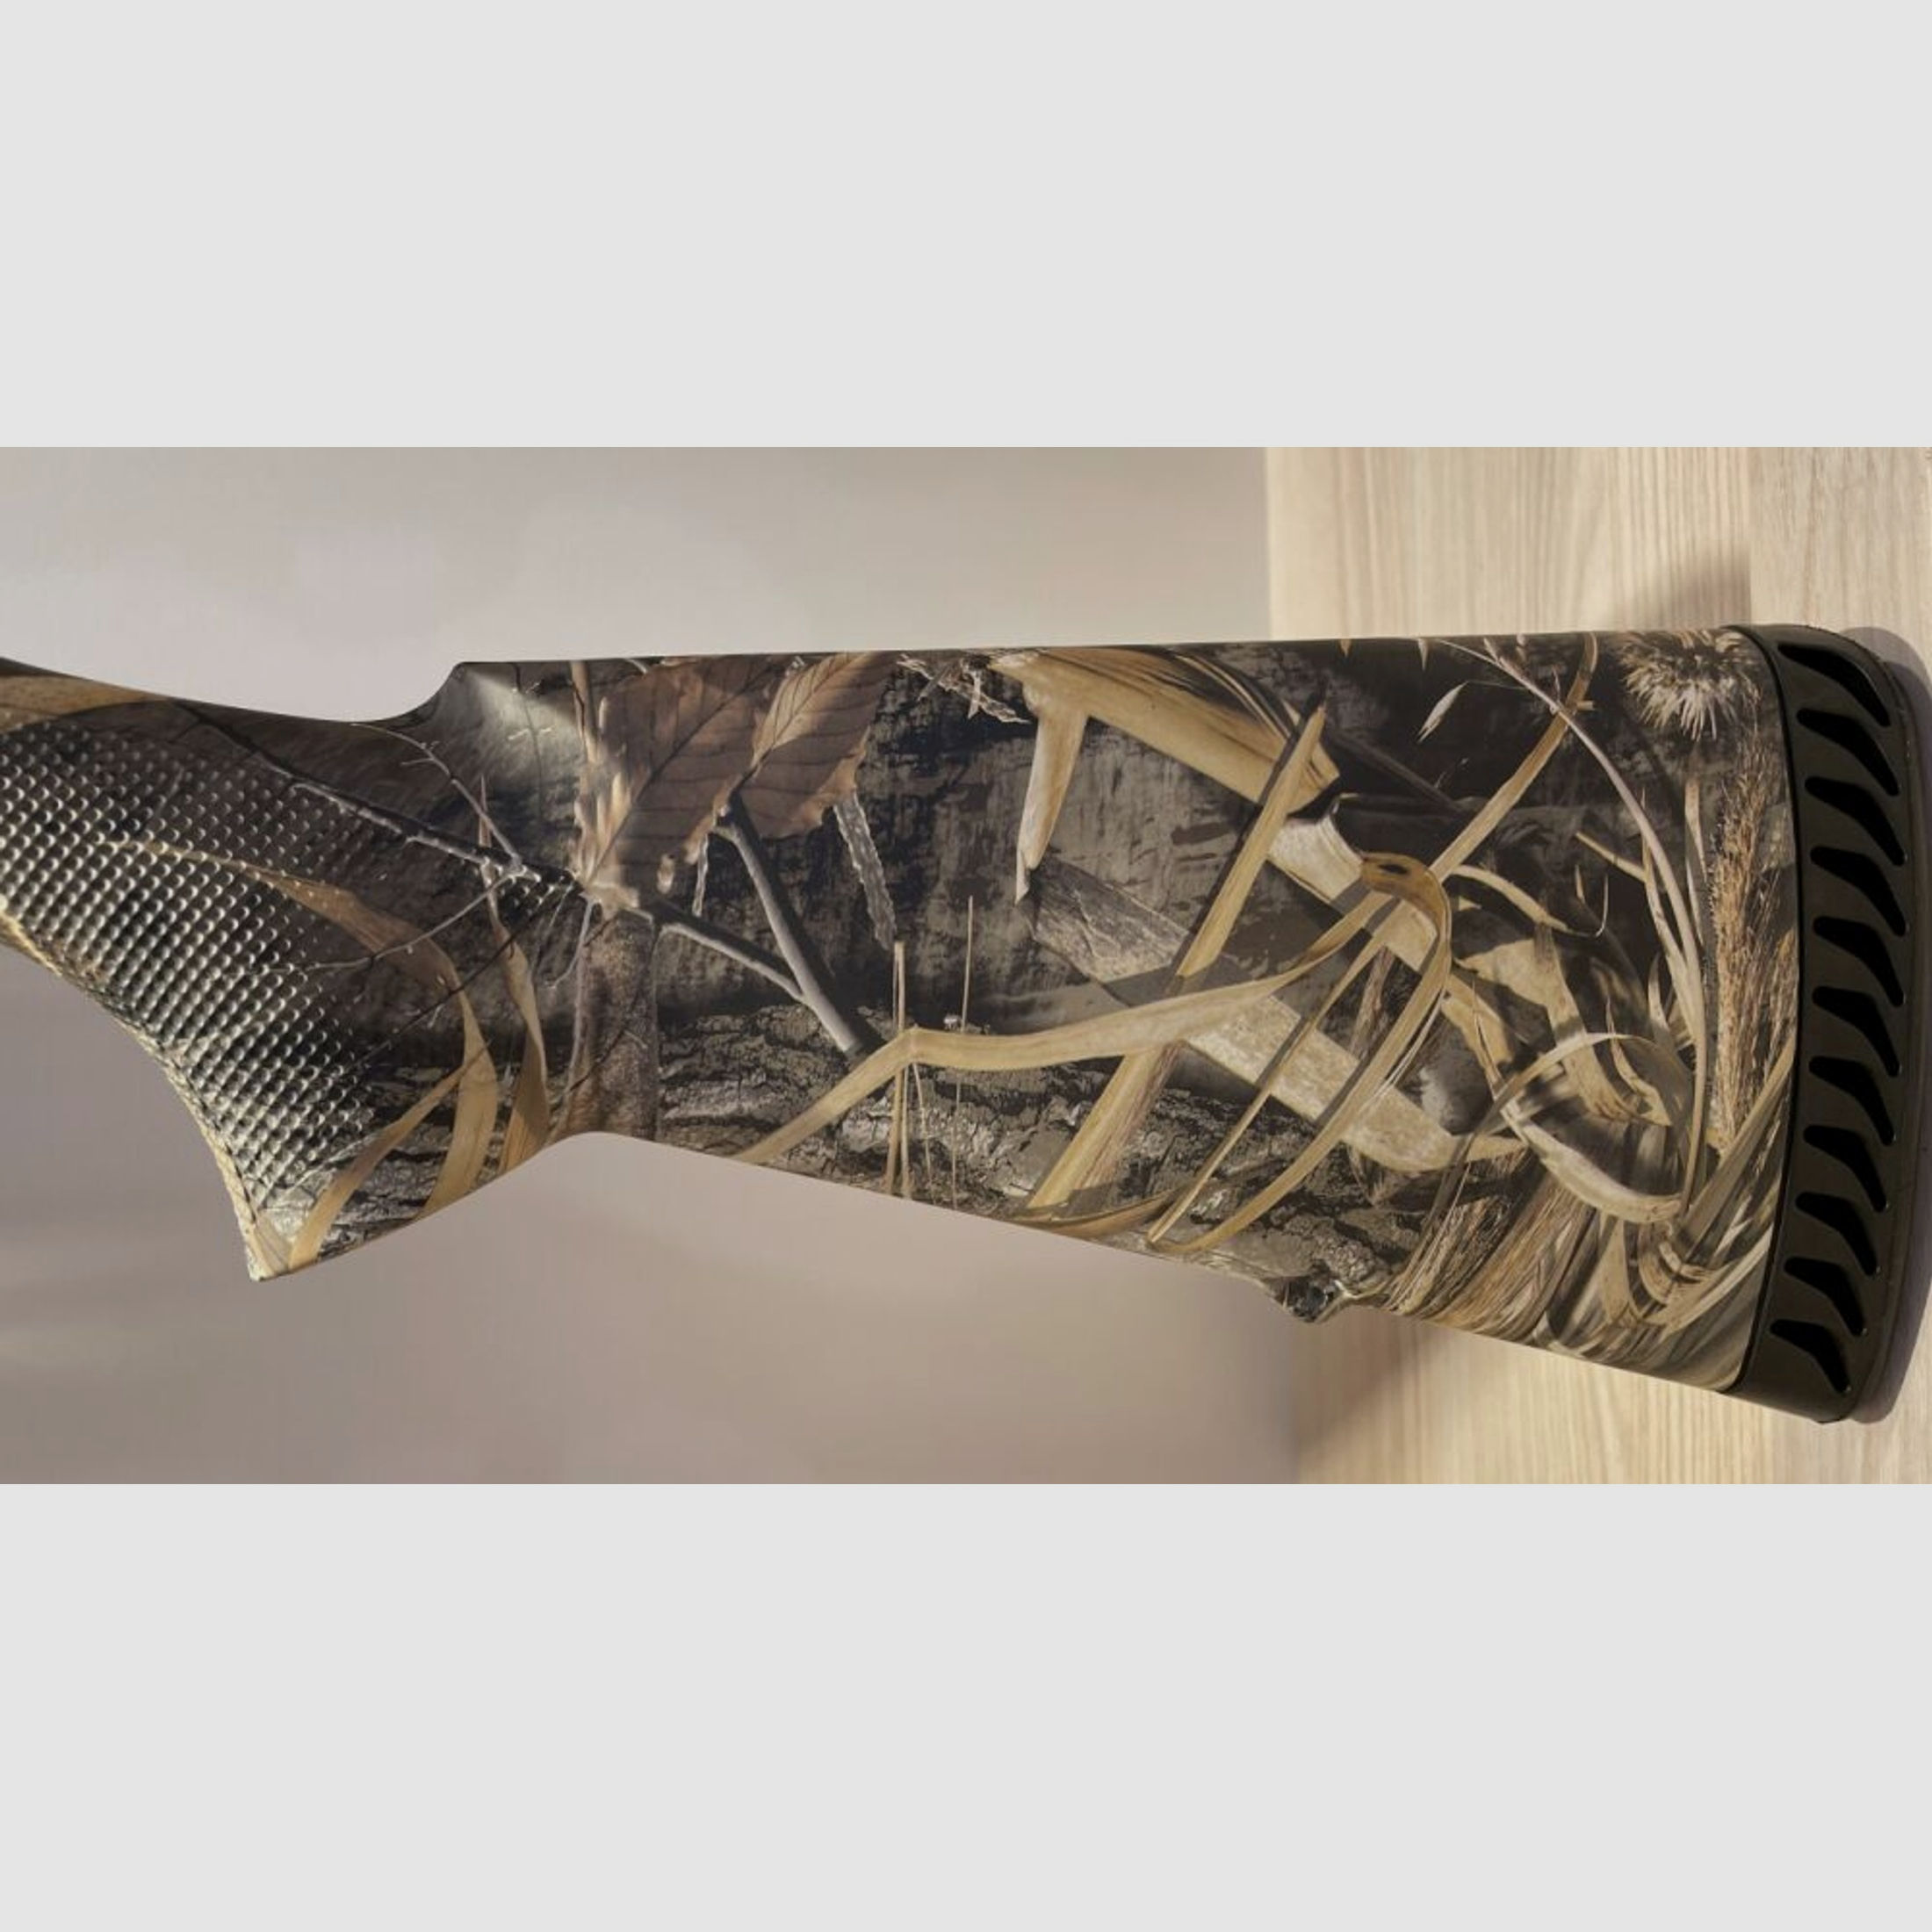 BENELLI	 MONTEFELTRO SYNTHETIC MAX 5HD